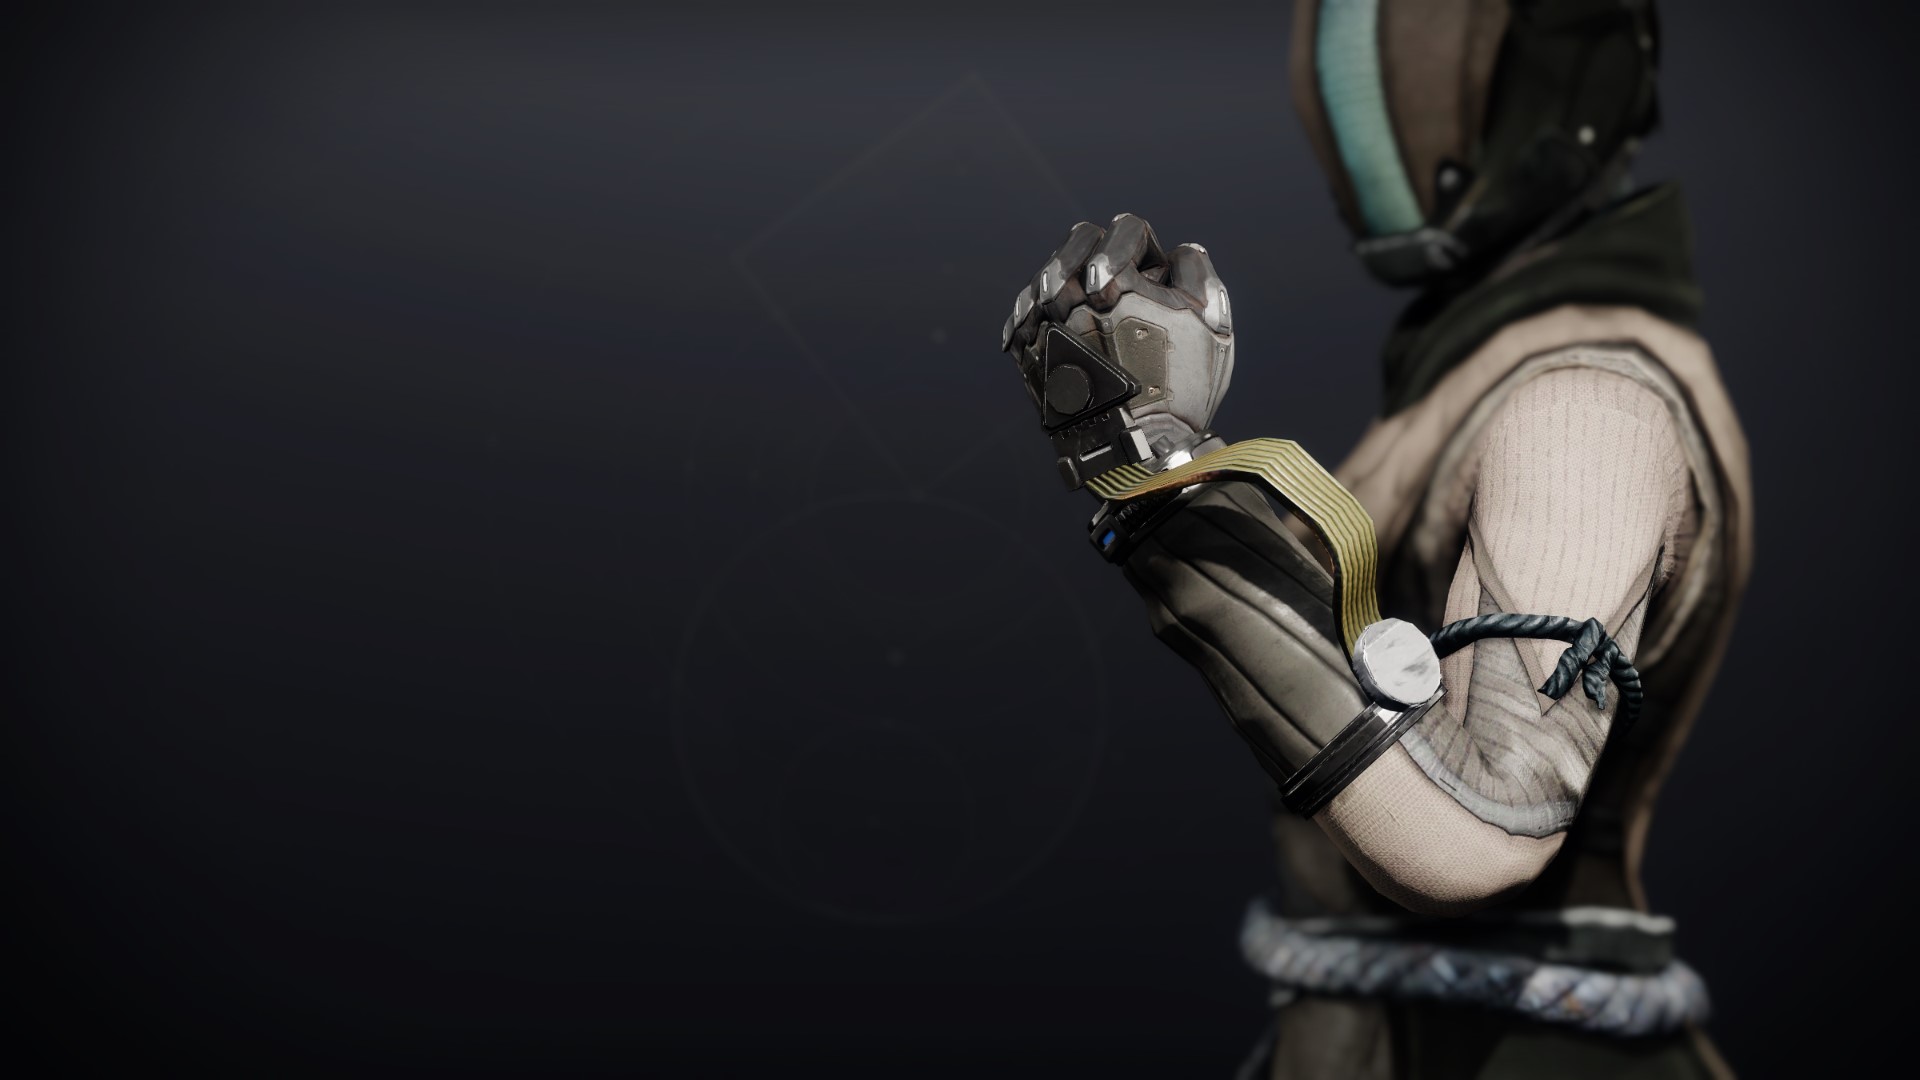 An in-game render of the Thorium Holt Gloves.